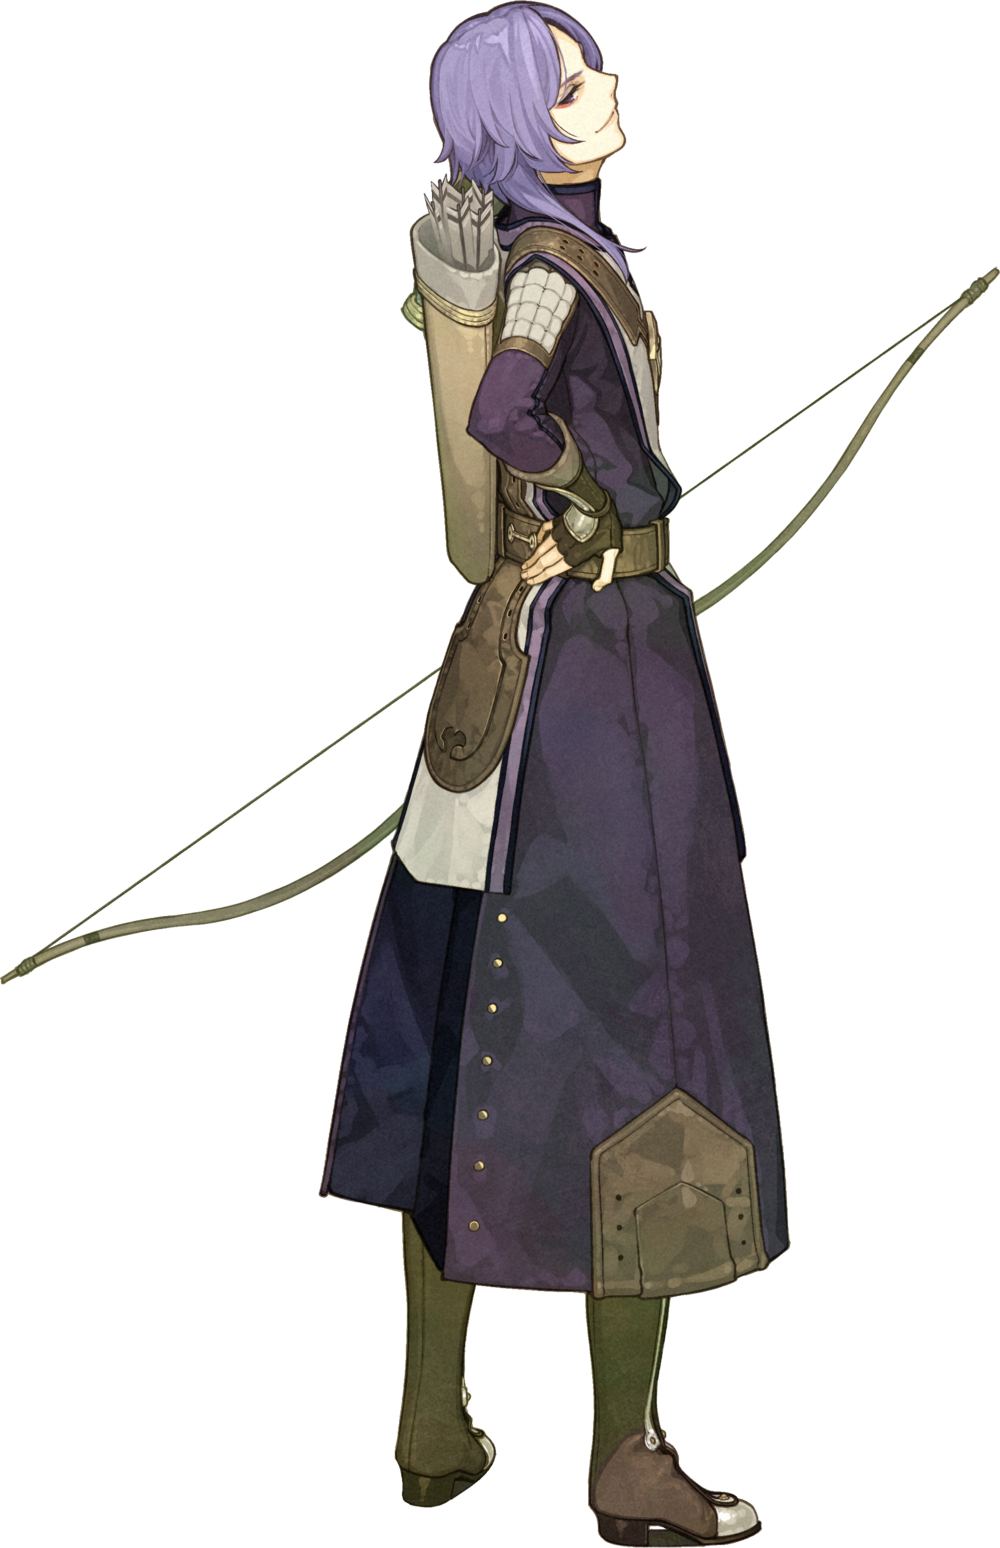 Leon From Fire Emblem Echoes Shadows Of Valentia Lgbtq Video Game Archive